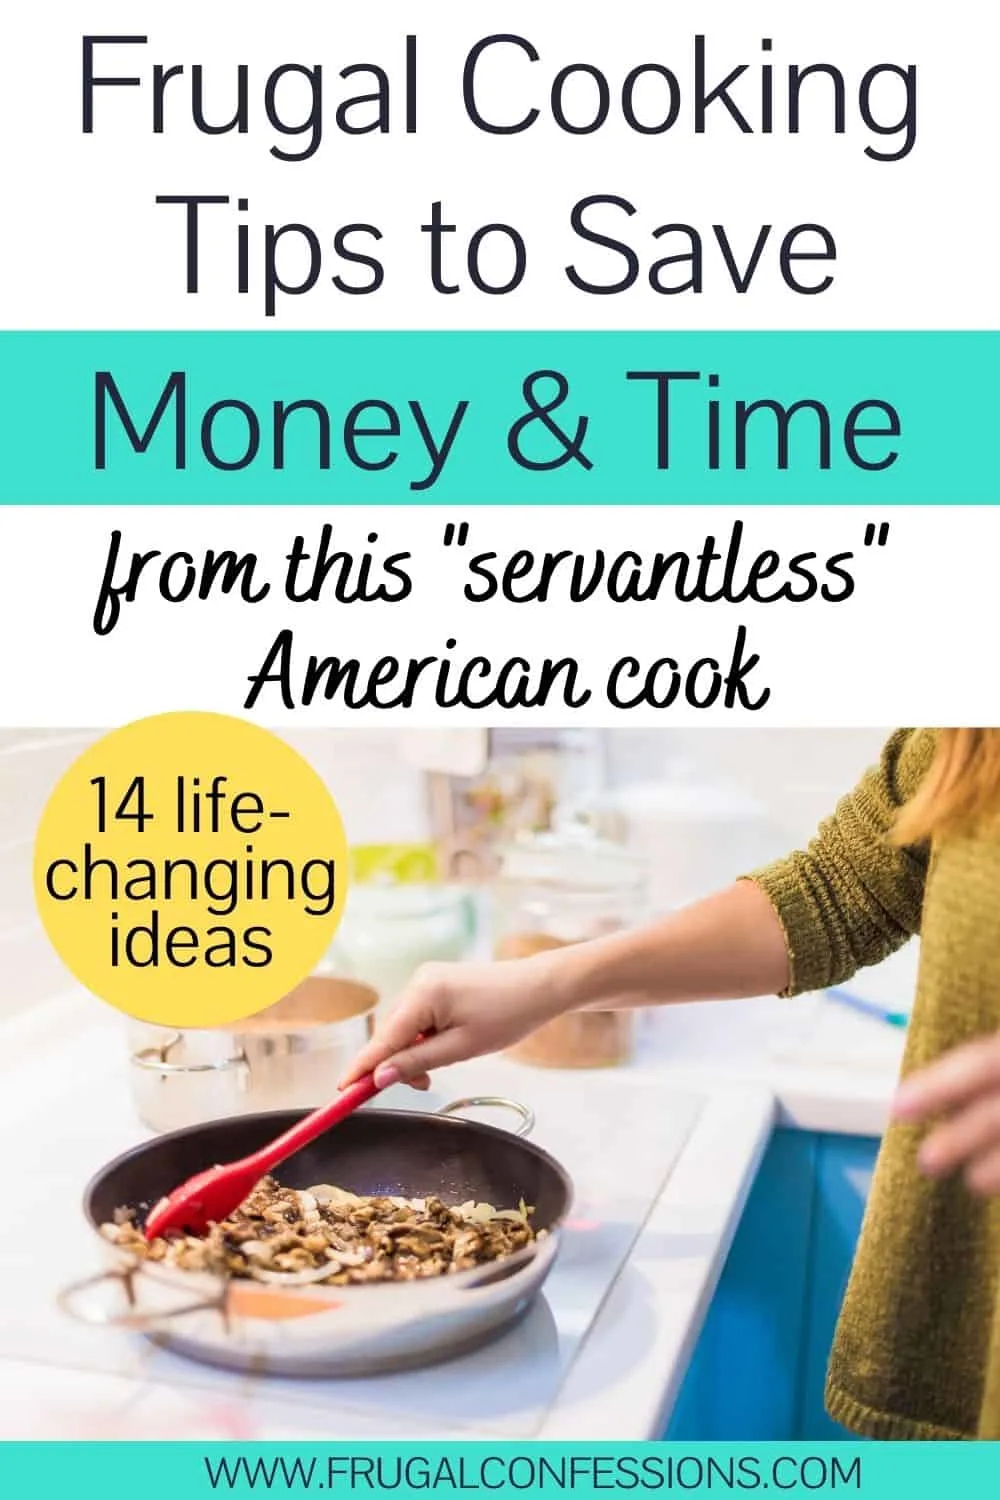 Frugal cooking tips